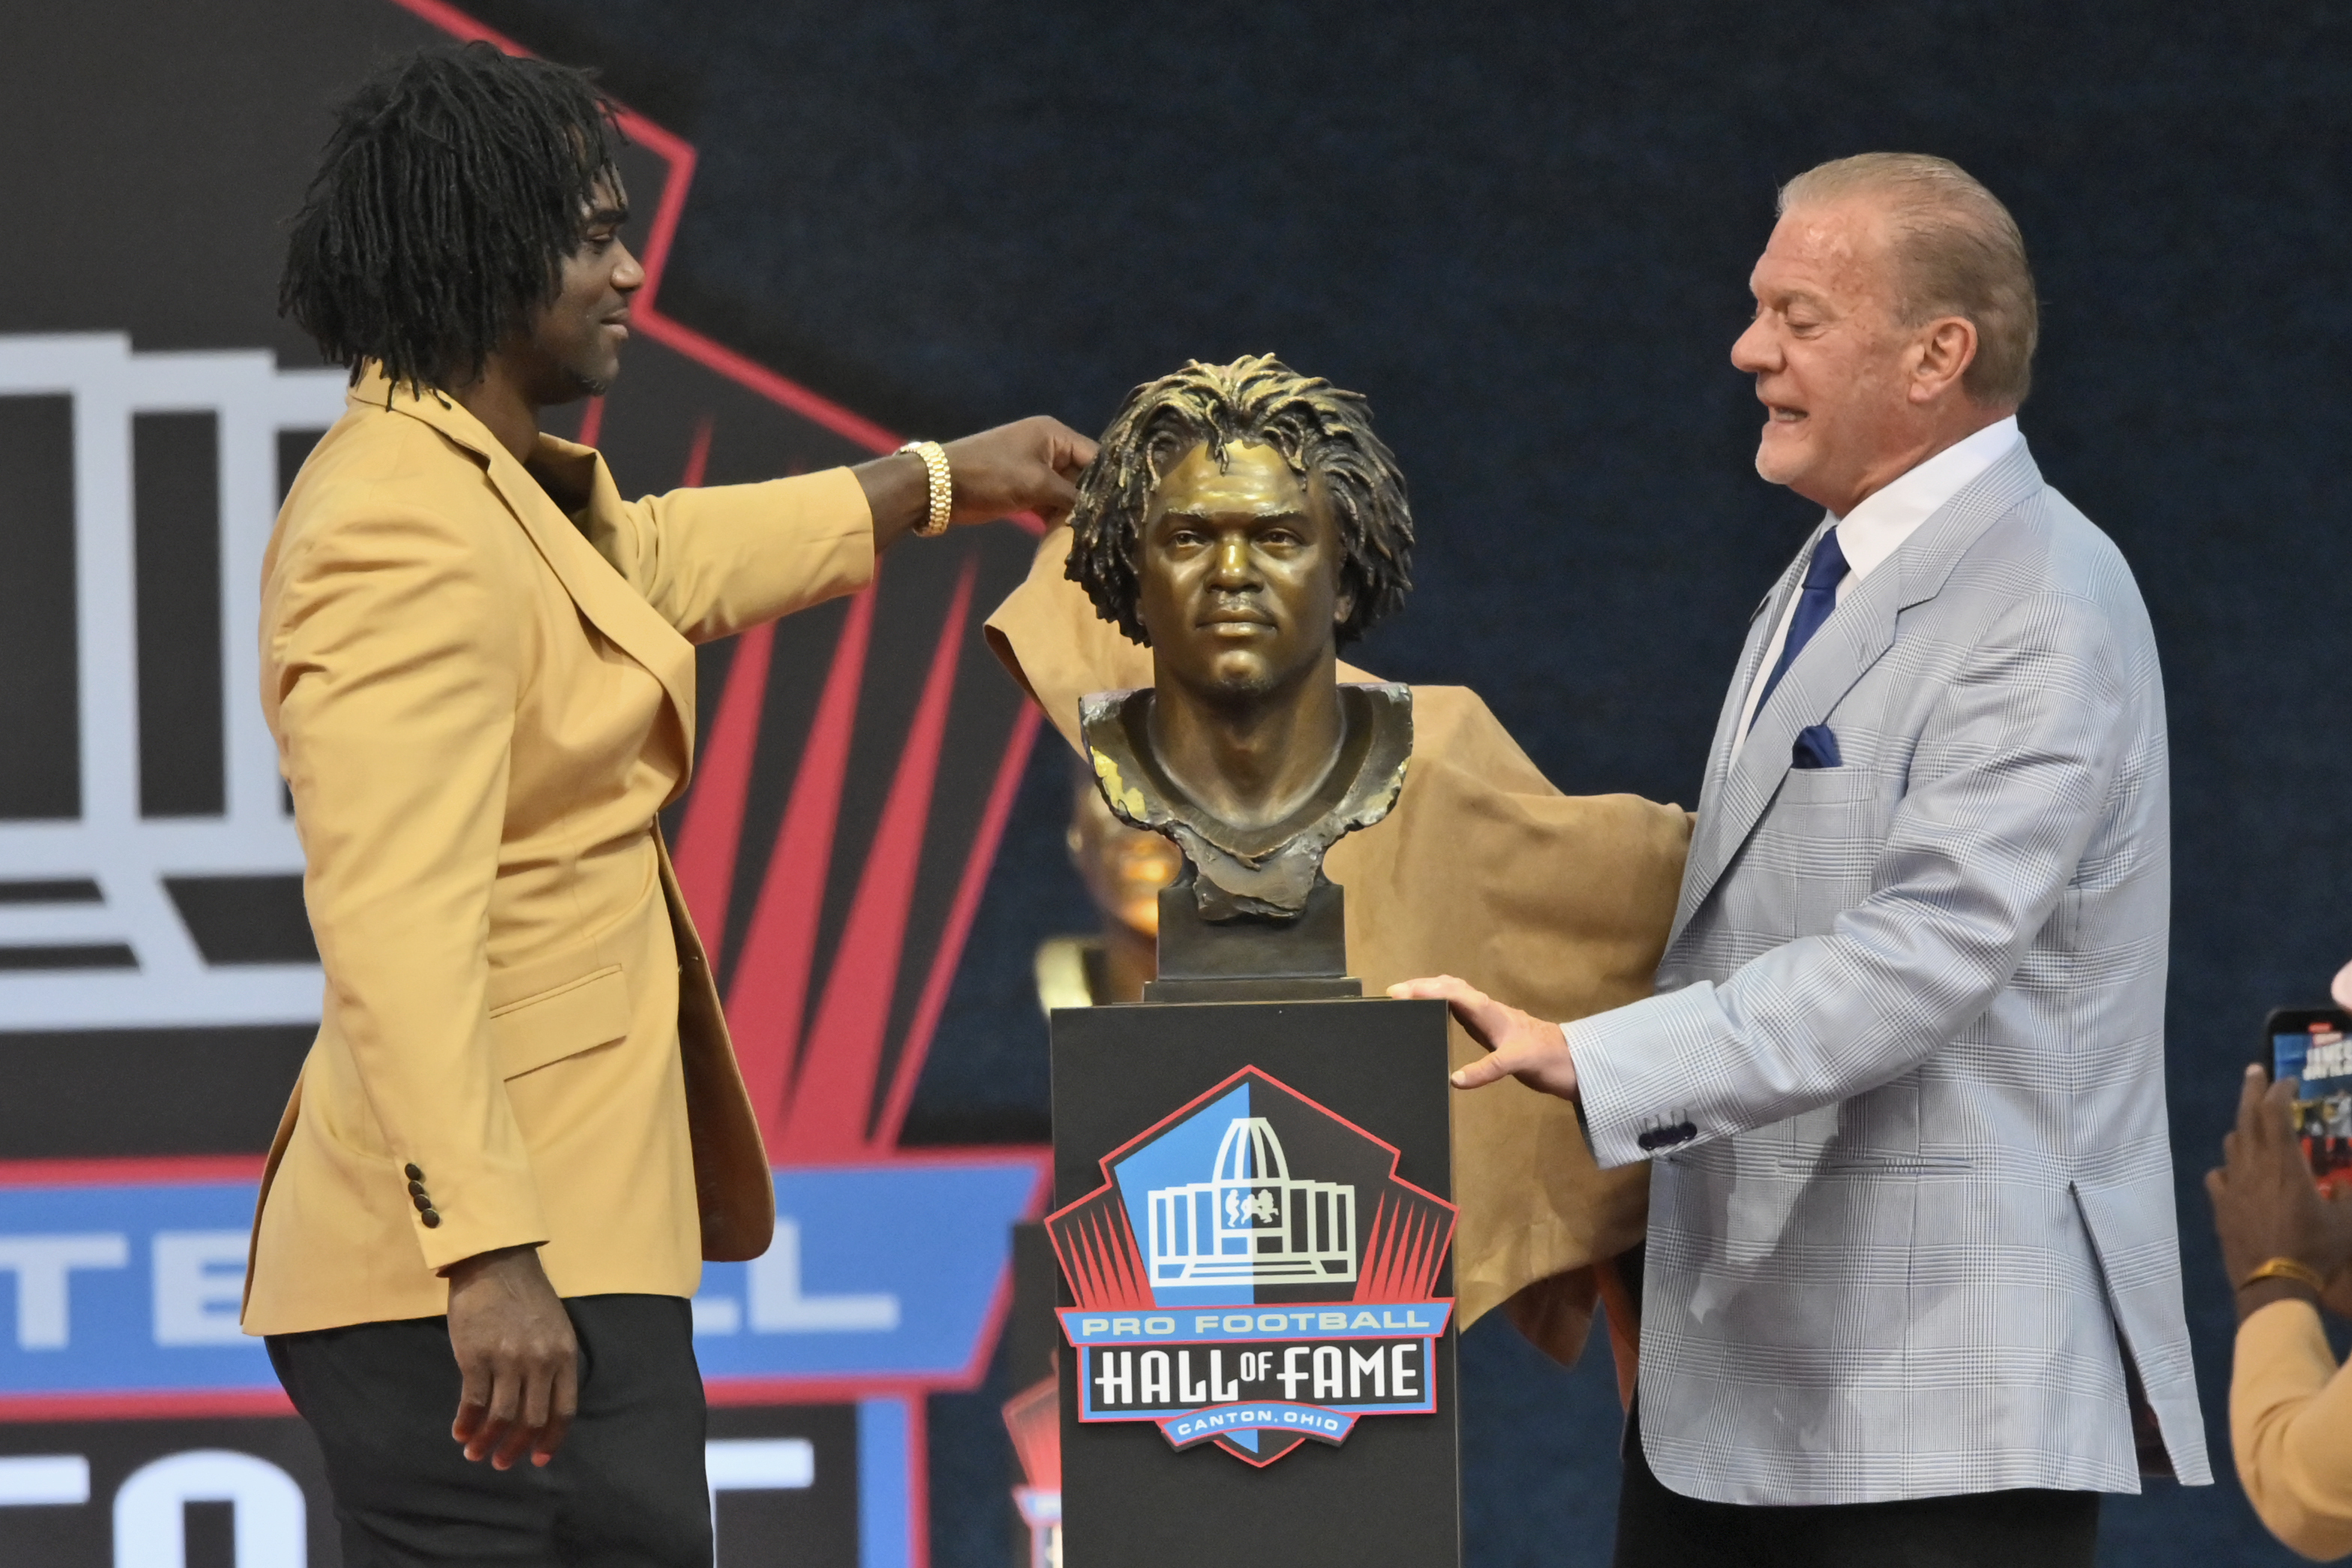 Pro Football Hall of Fame Enshrinement Week: List of events